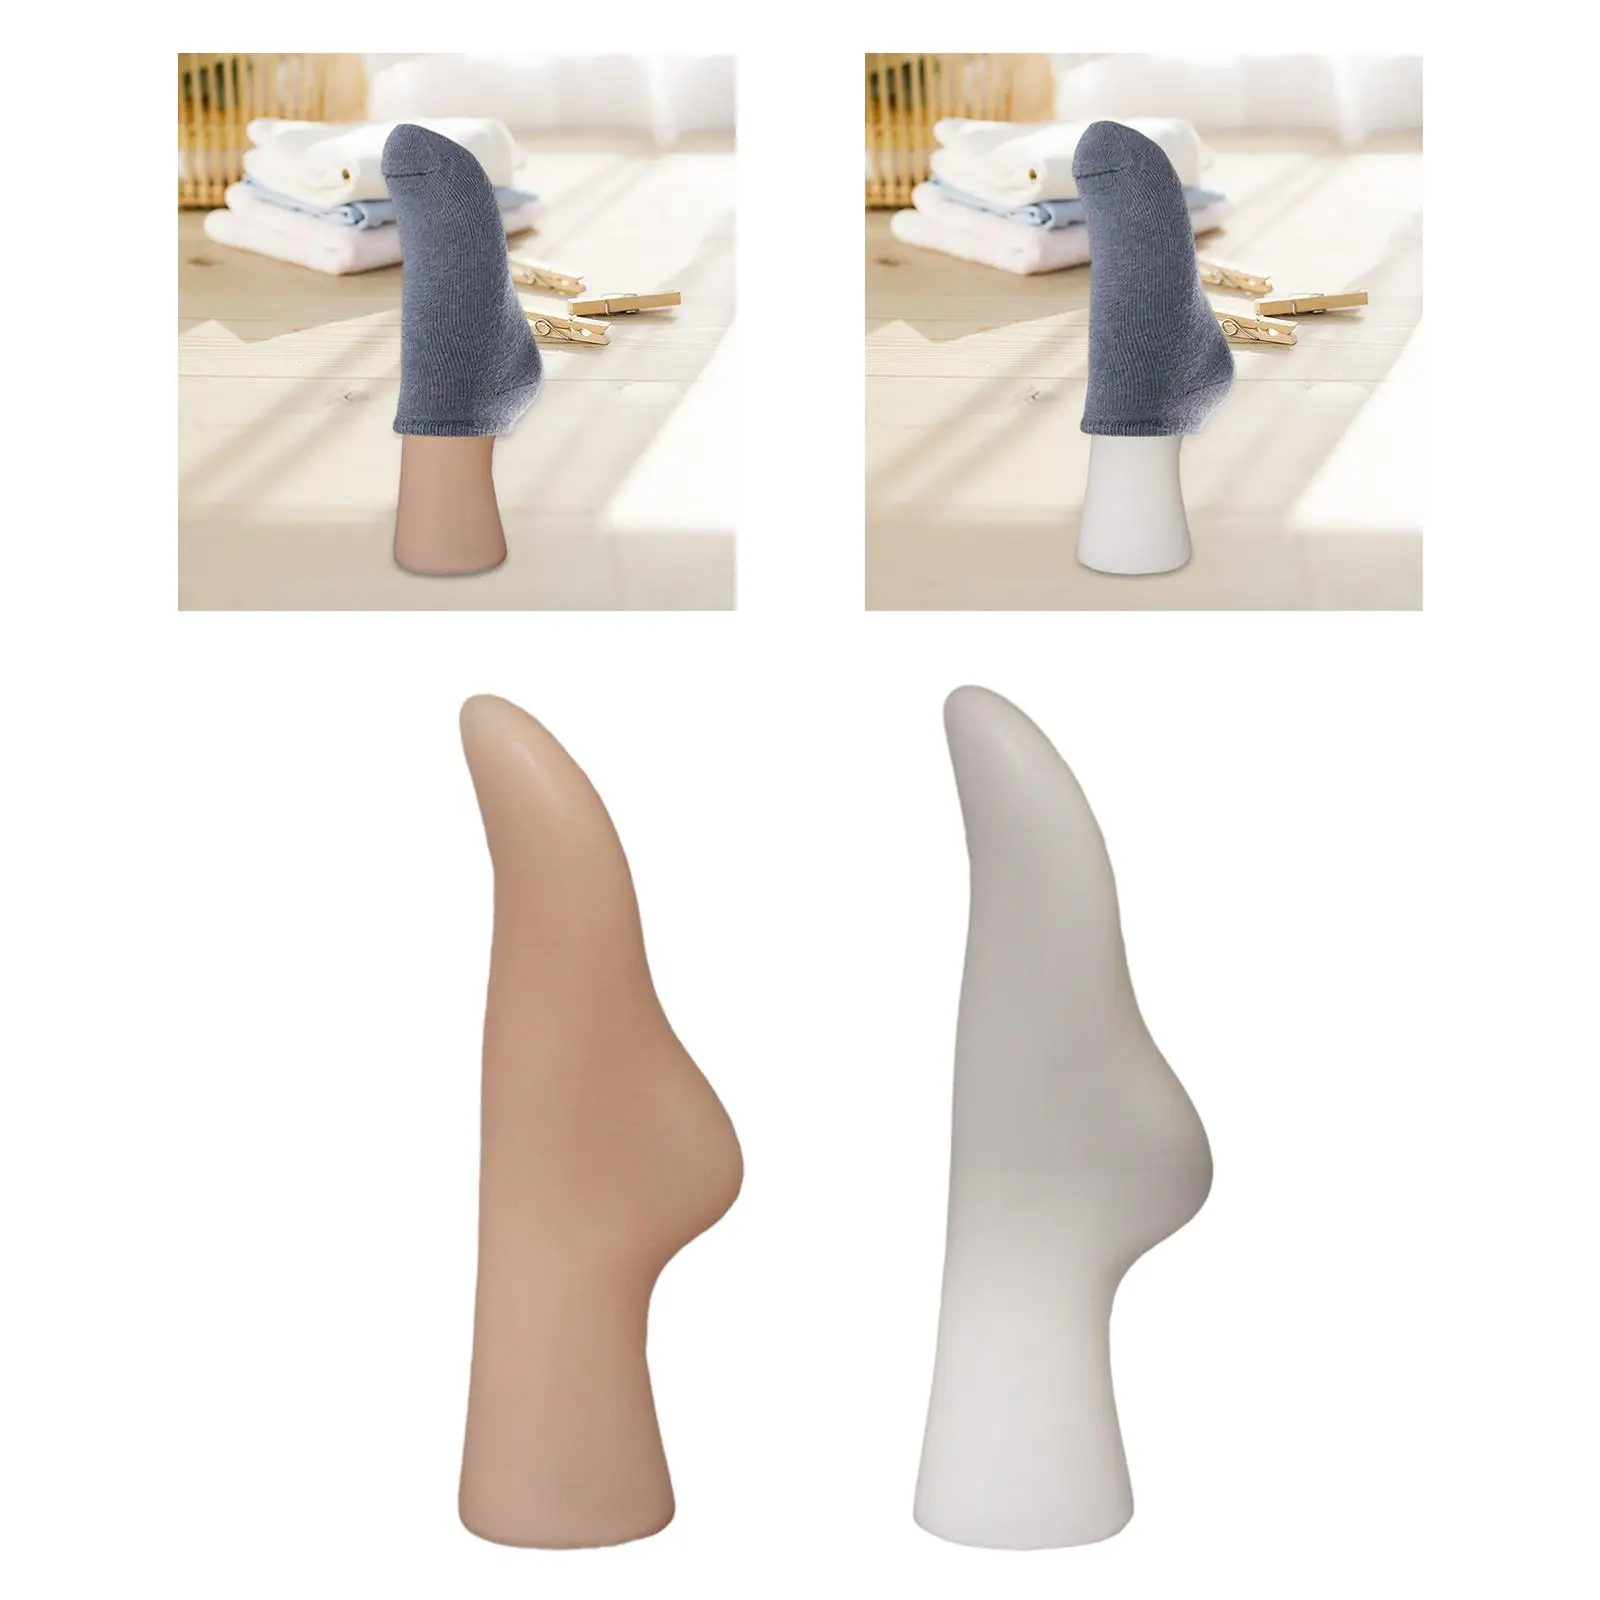 Lifesize Female Mannequin Foot Shoes Support Foot Model for Home Chains Shop